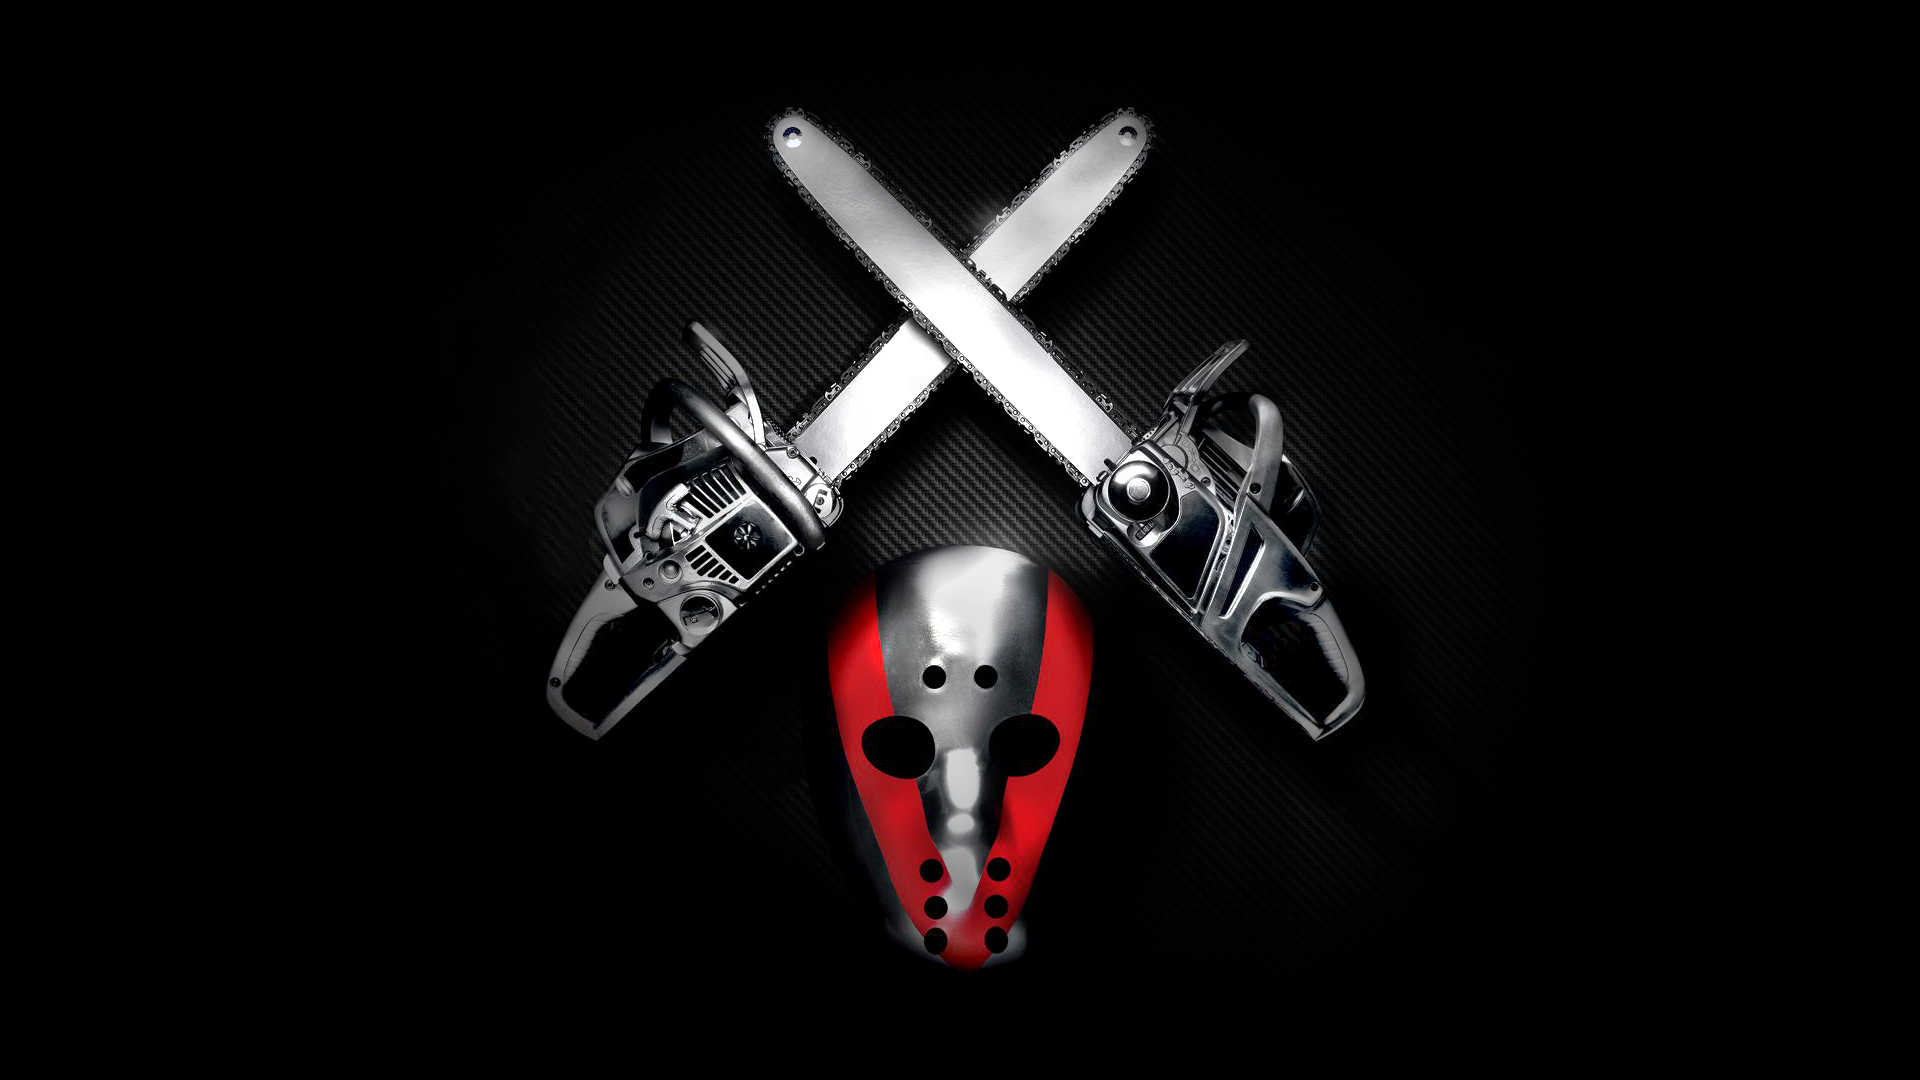 I Made A Shady Xv Wallpaper Thought You Guys Might Like It